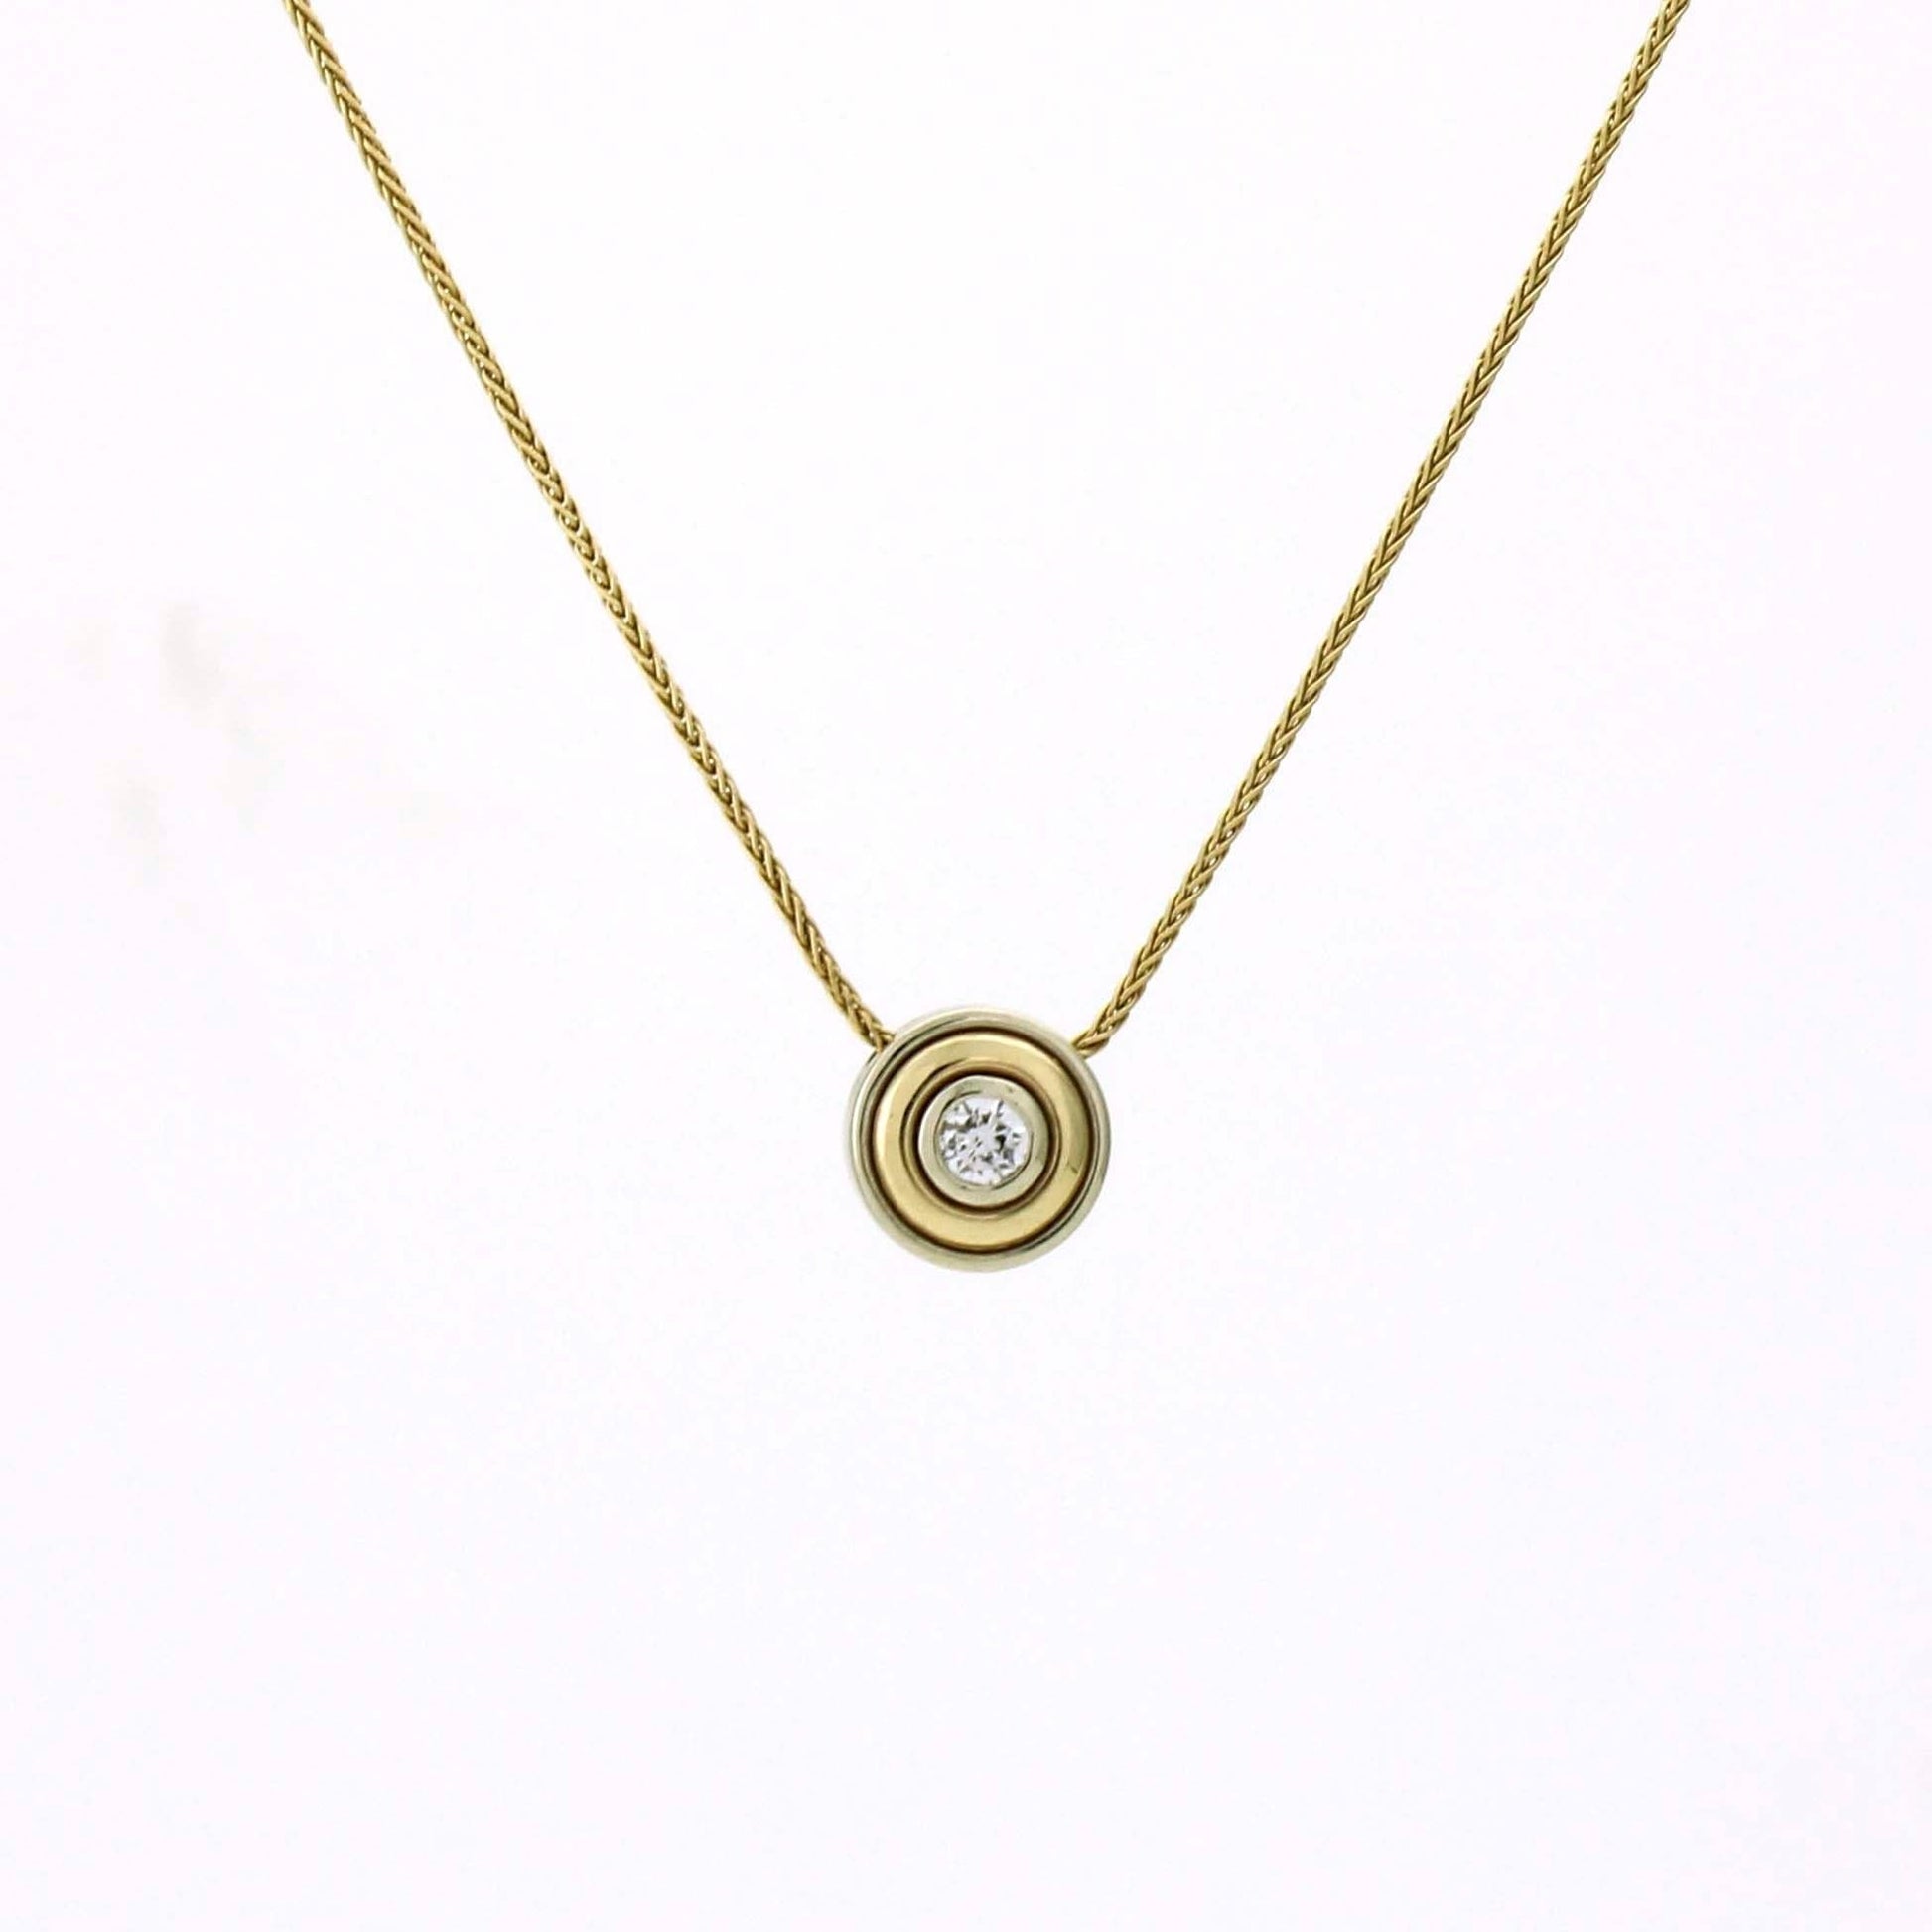 Women's Bezel Solitaire Natural Diamond Necklace in 14k Yellow Gold - 31 Jewels Inc.